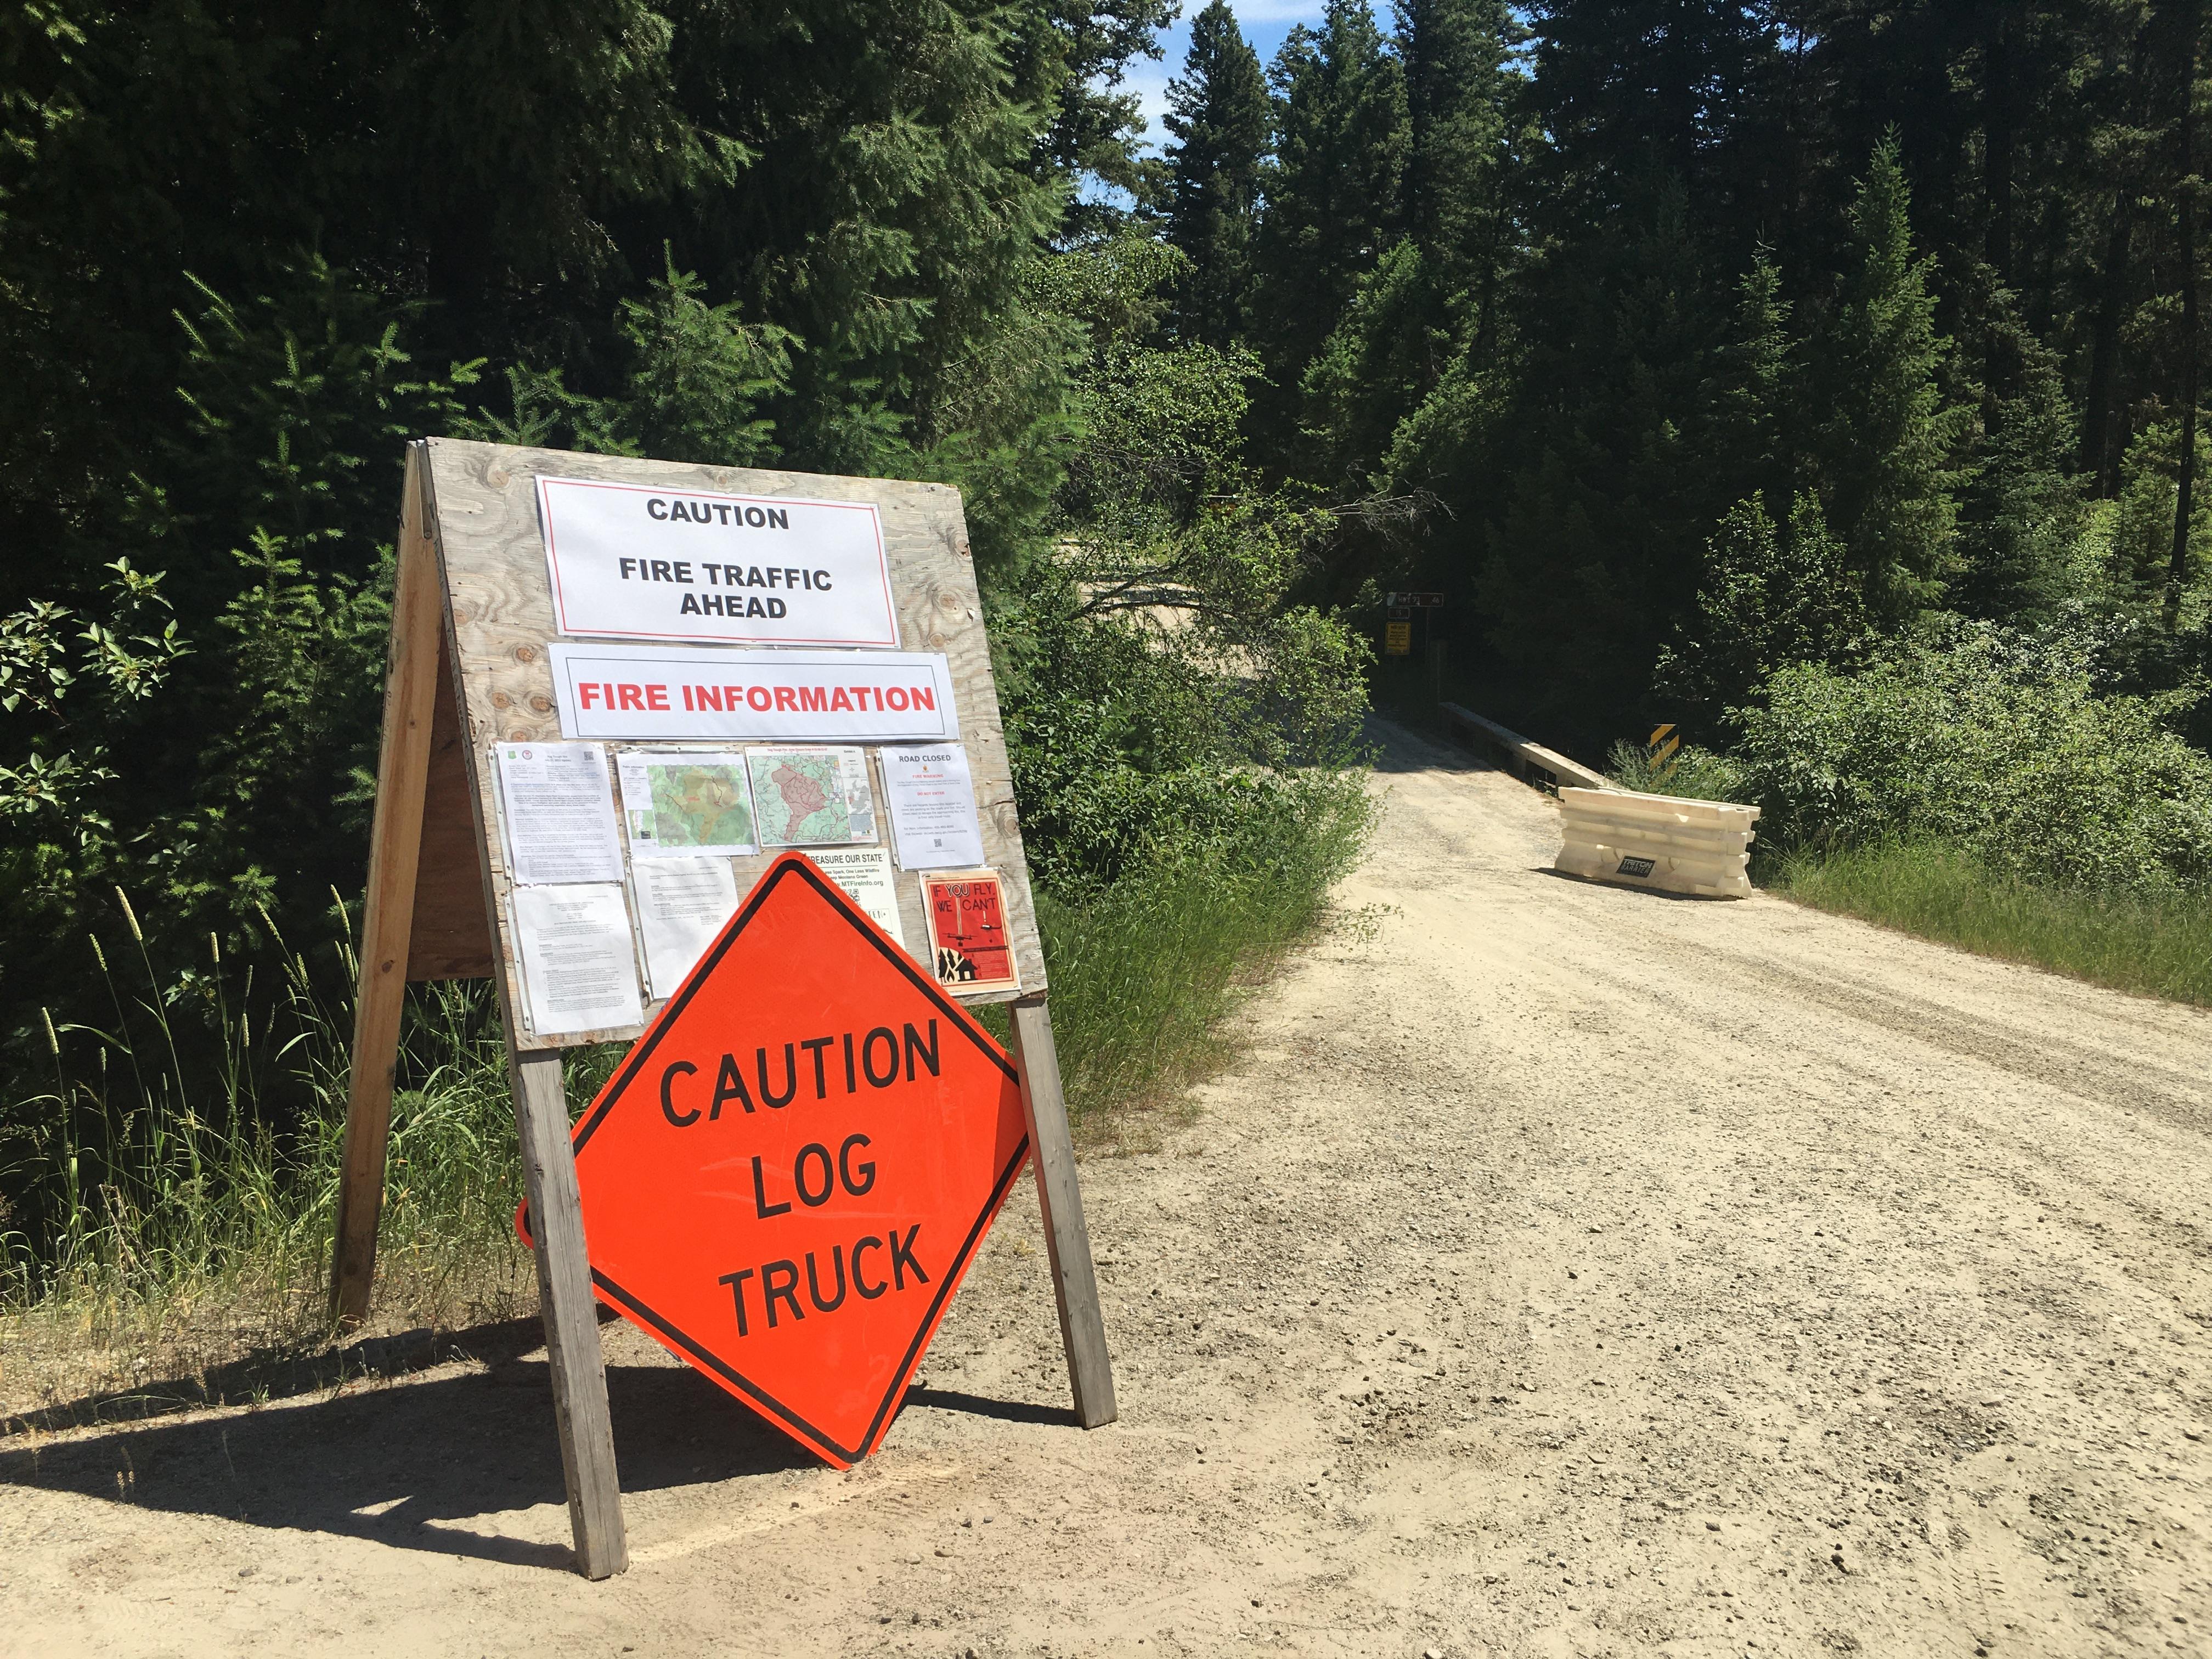 A 5 mile stretch of Skalkaho-Rye Road (FS 75 Road) is closed from its junction with Skalkaho Highway (HWY 38) to Skalkaho Creek Trail #503. Skalkaho Highway is currently open.